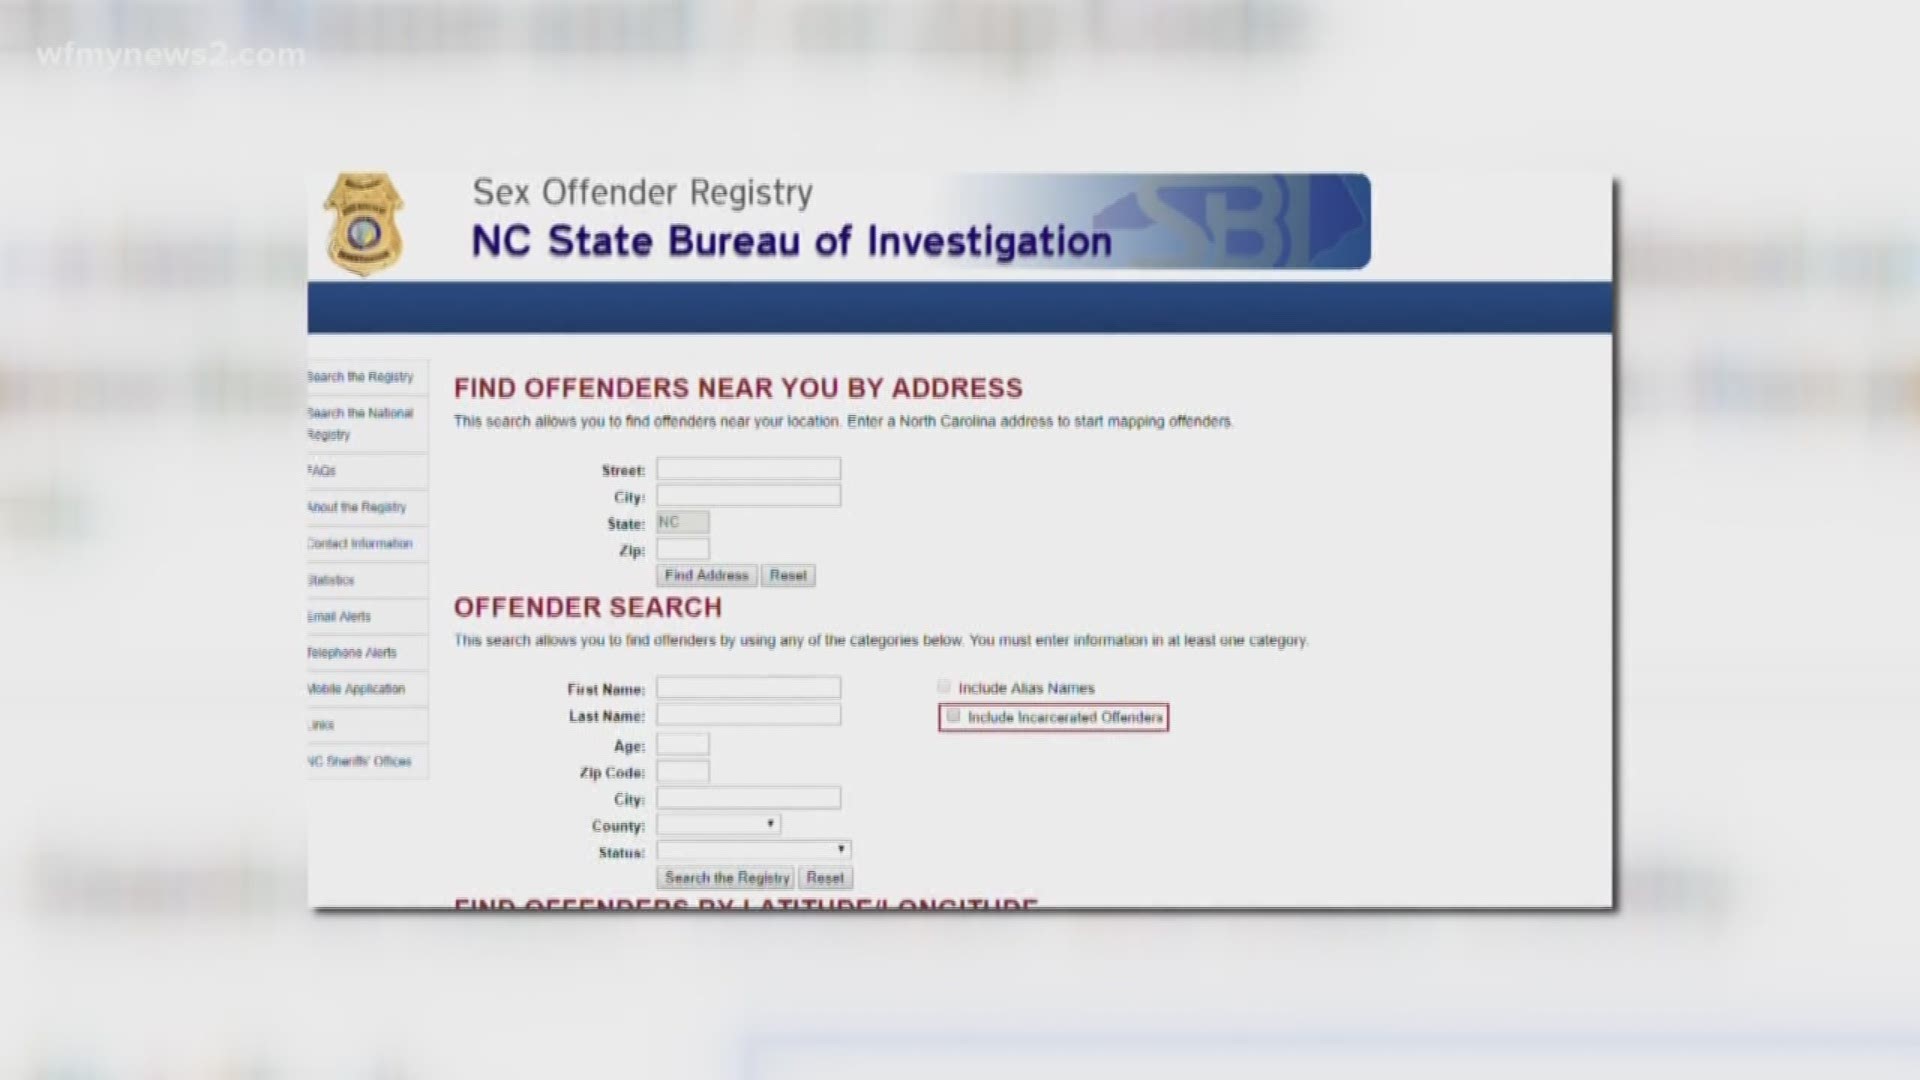 When people register as sex offenders in North Carolina they have to follow the rules.